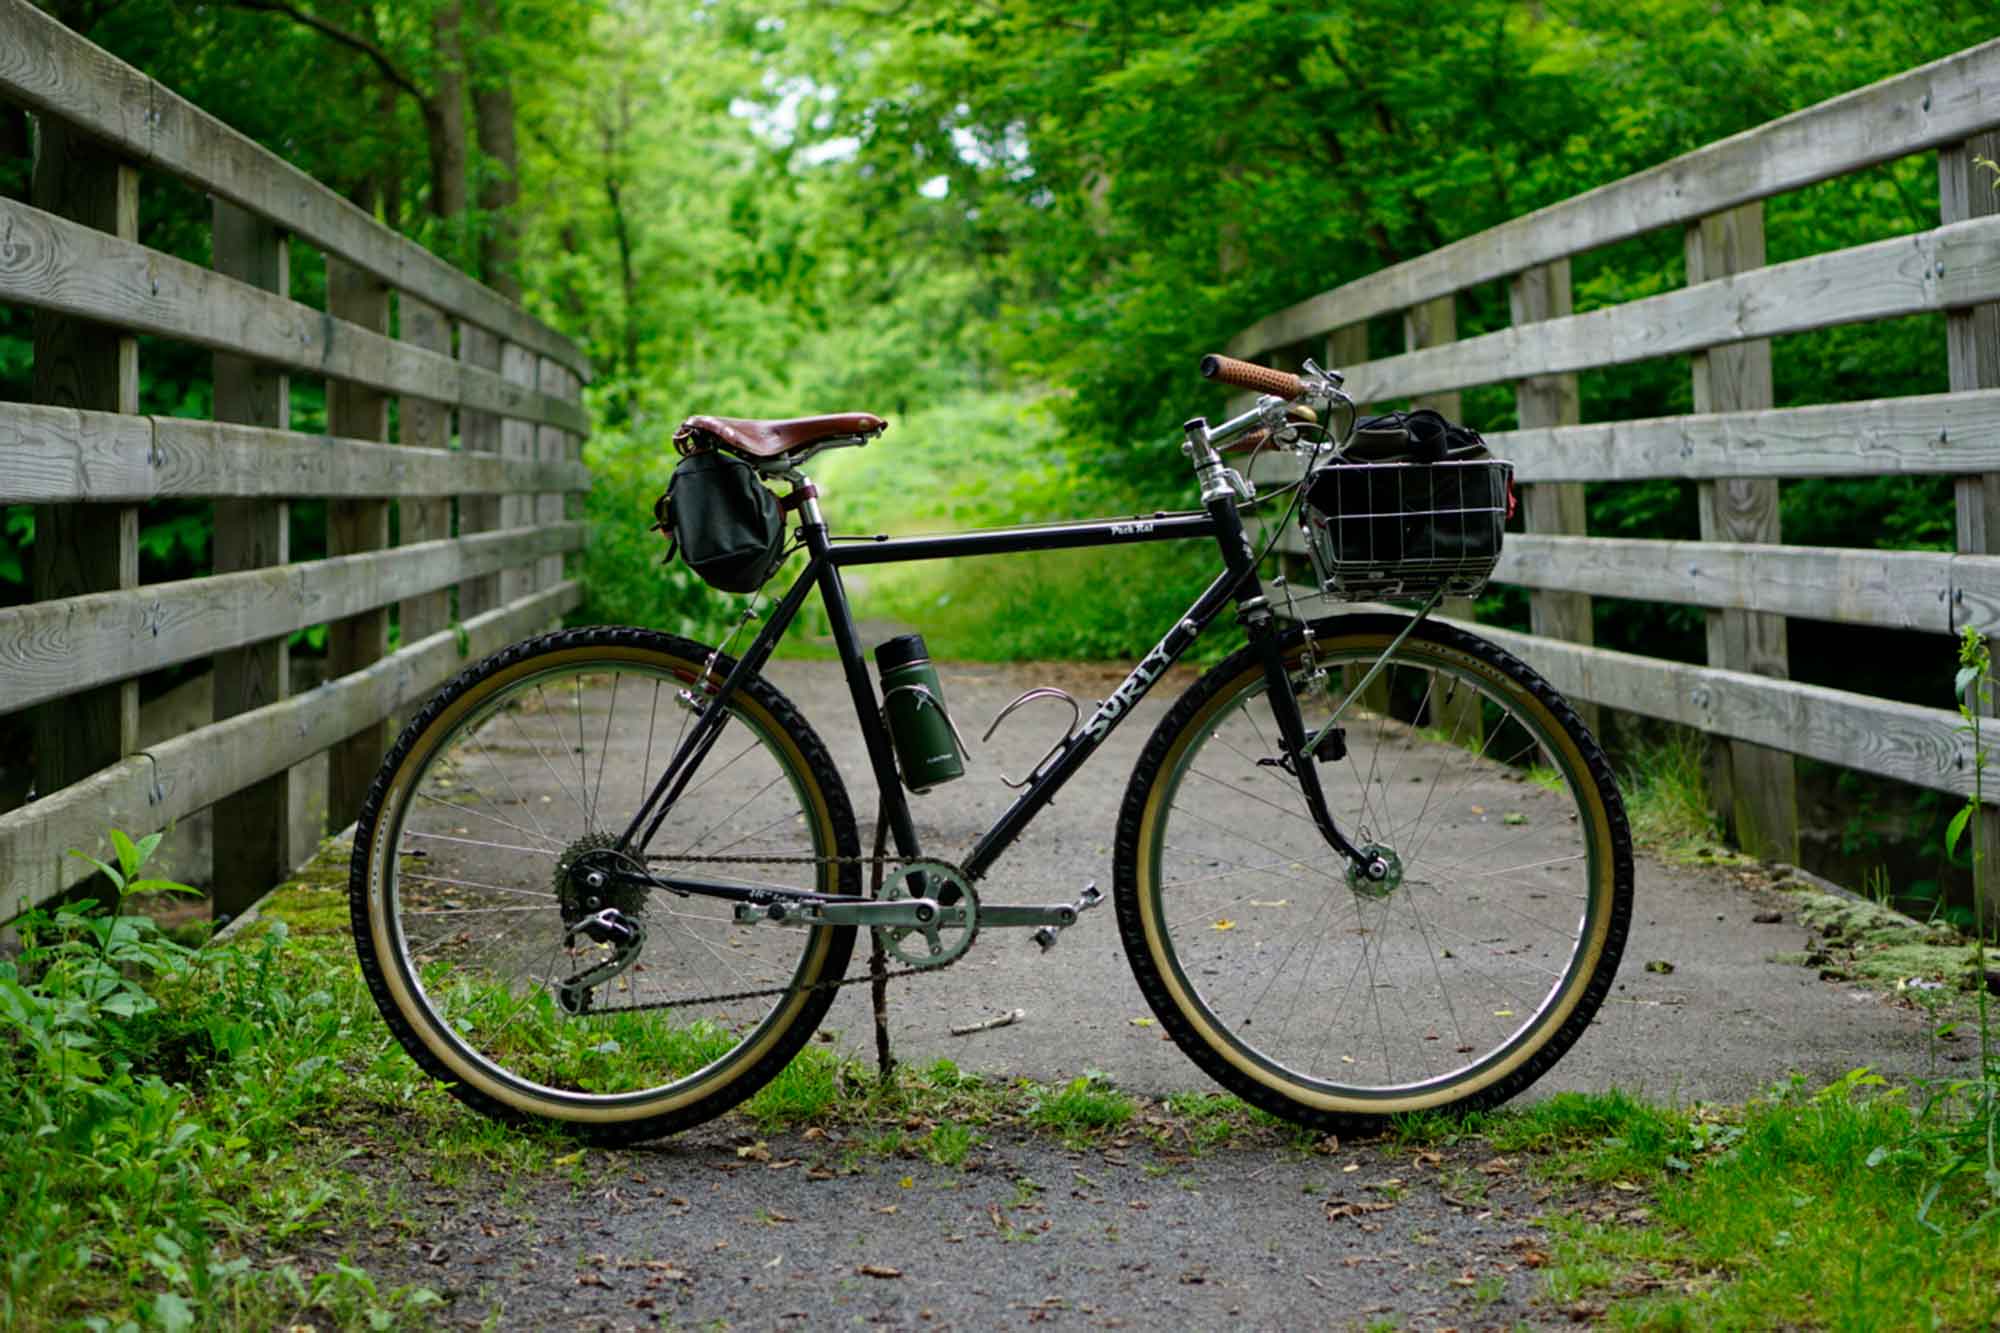 Right side view of Surly Pack Rat bike with front basket, parked on a paved trail bridge in the woods